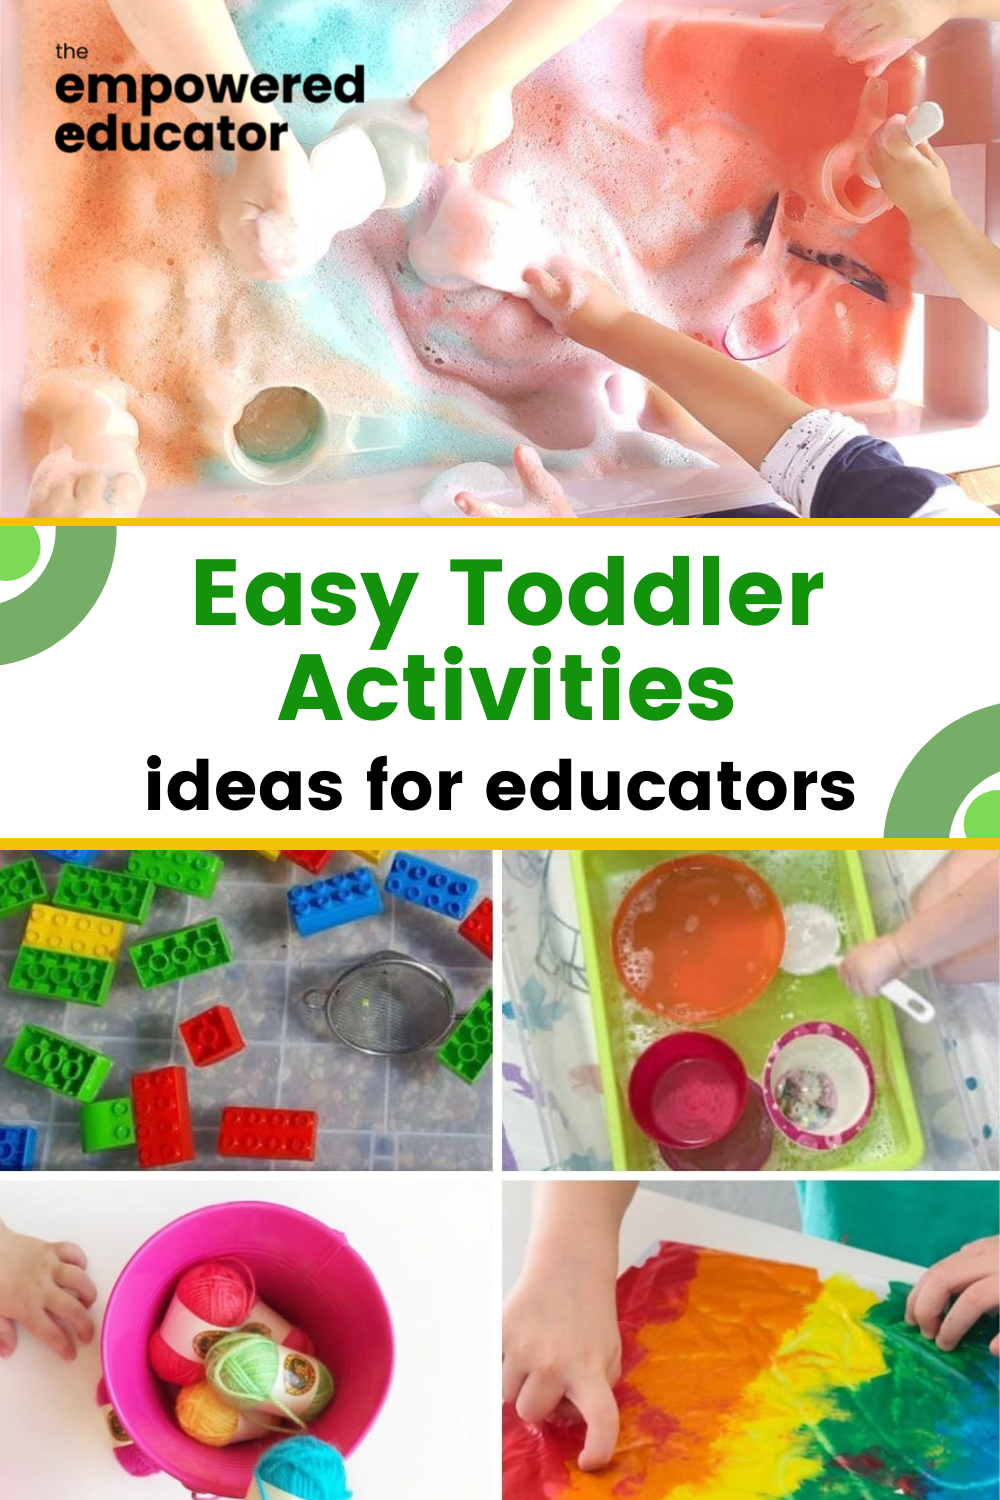 Easy Toddler Activity Ideas for Early Years Educators